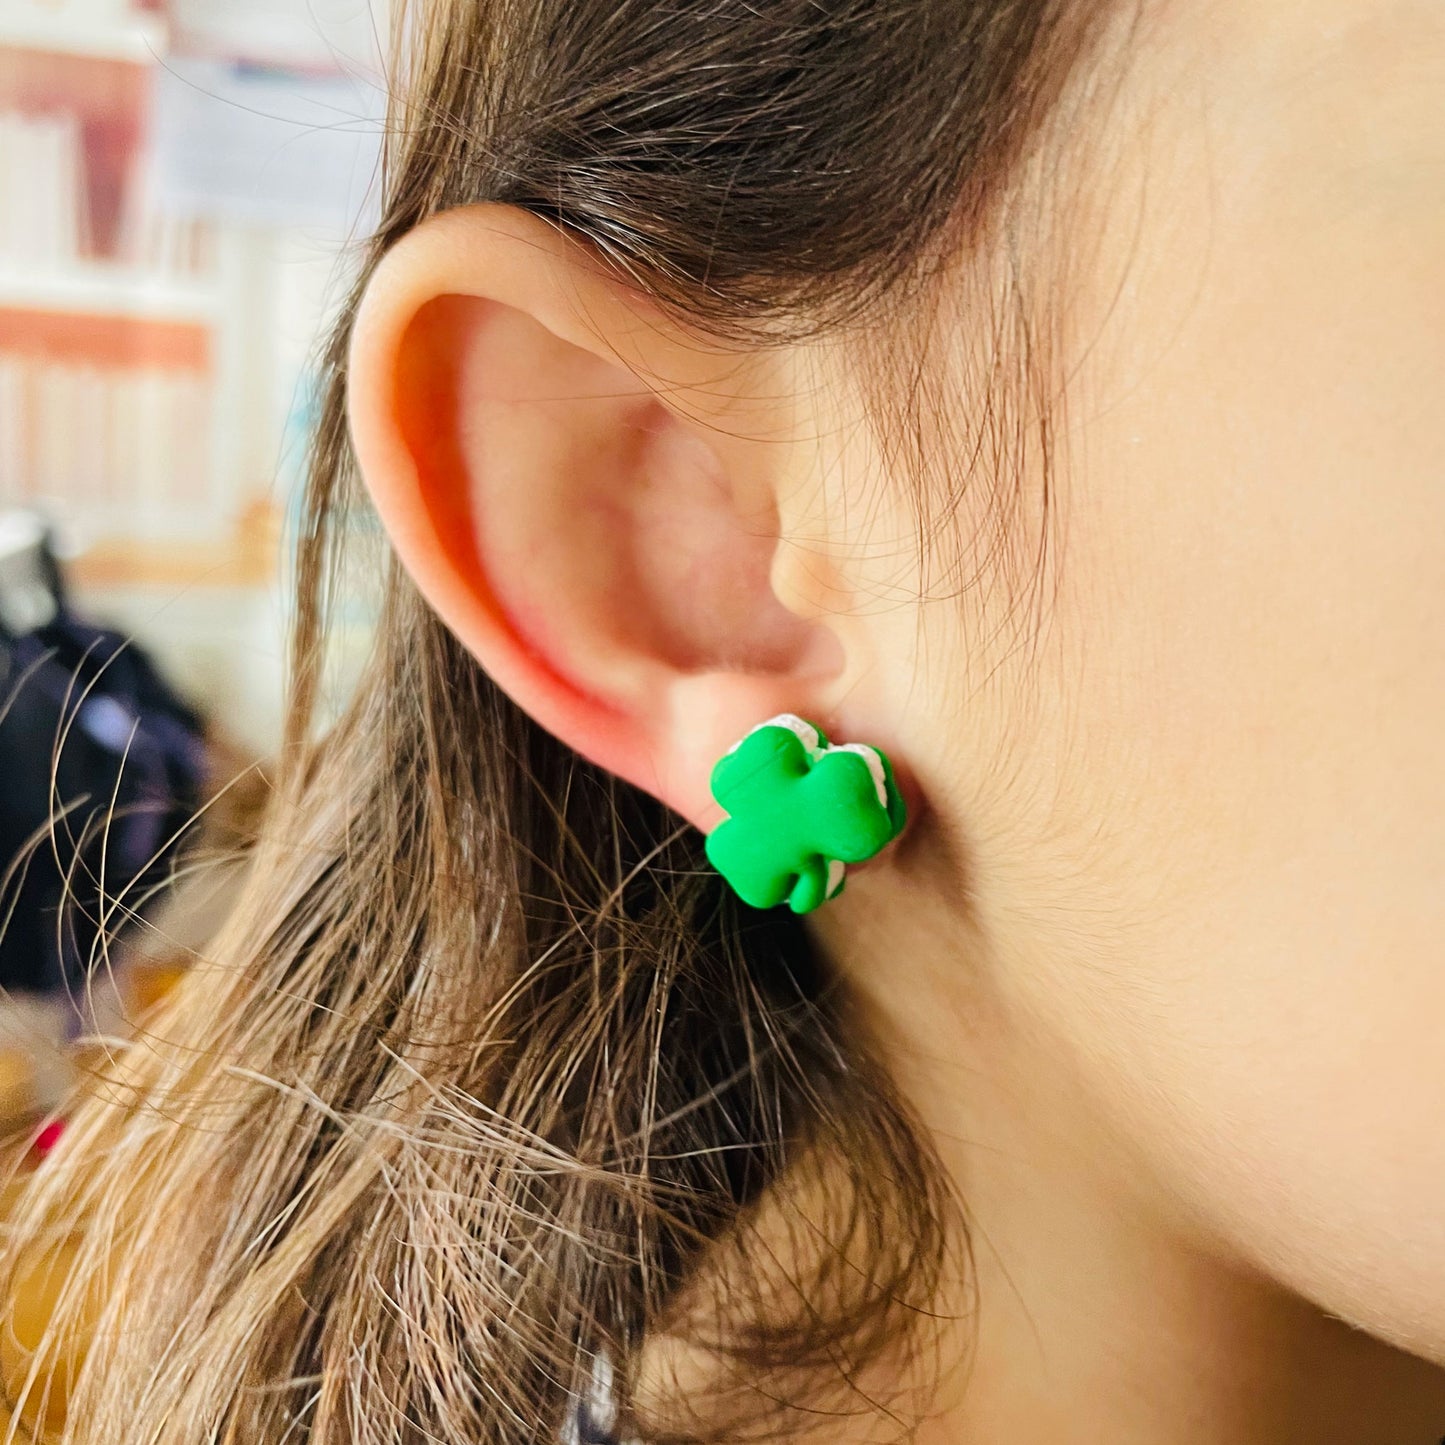 St. Patrick's Day Shamrock Clover Polymer Clay Stud Earrings